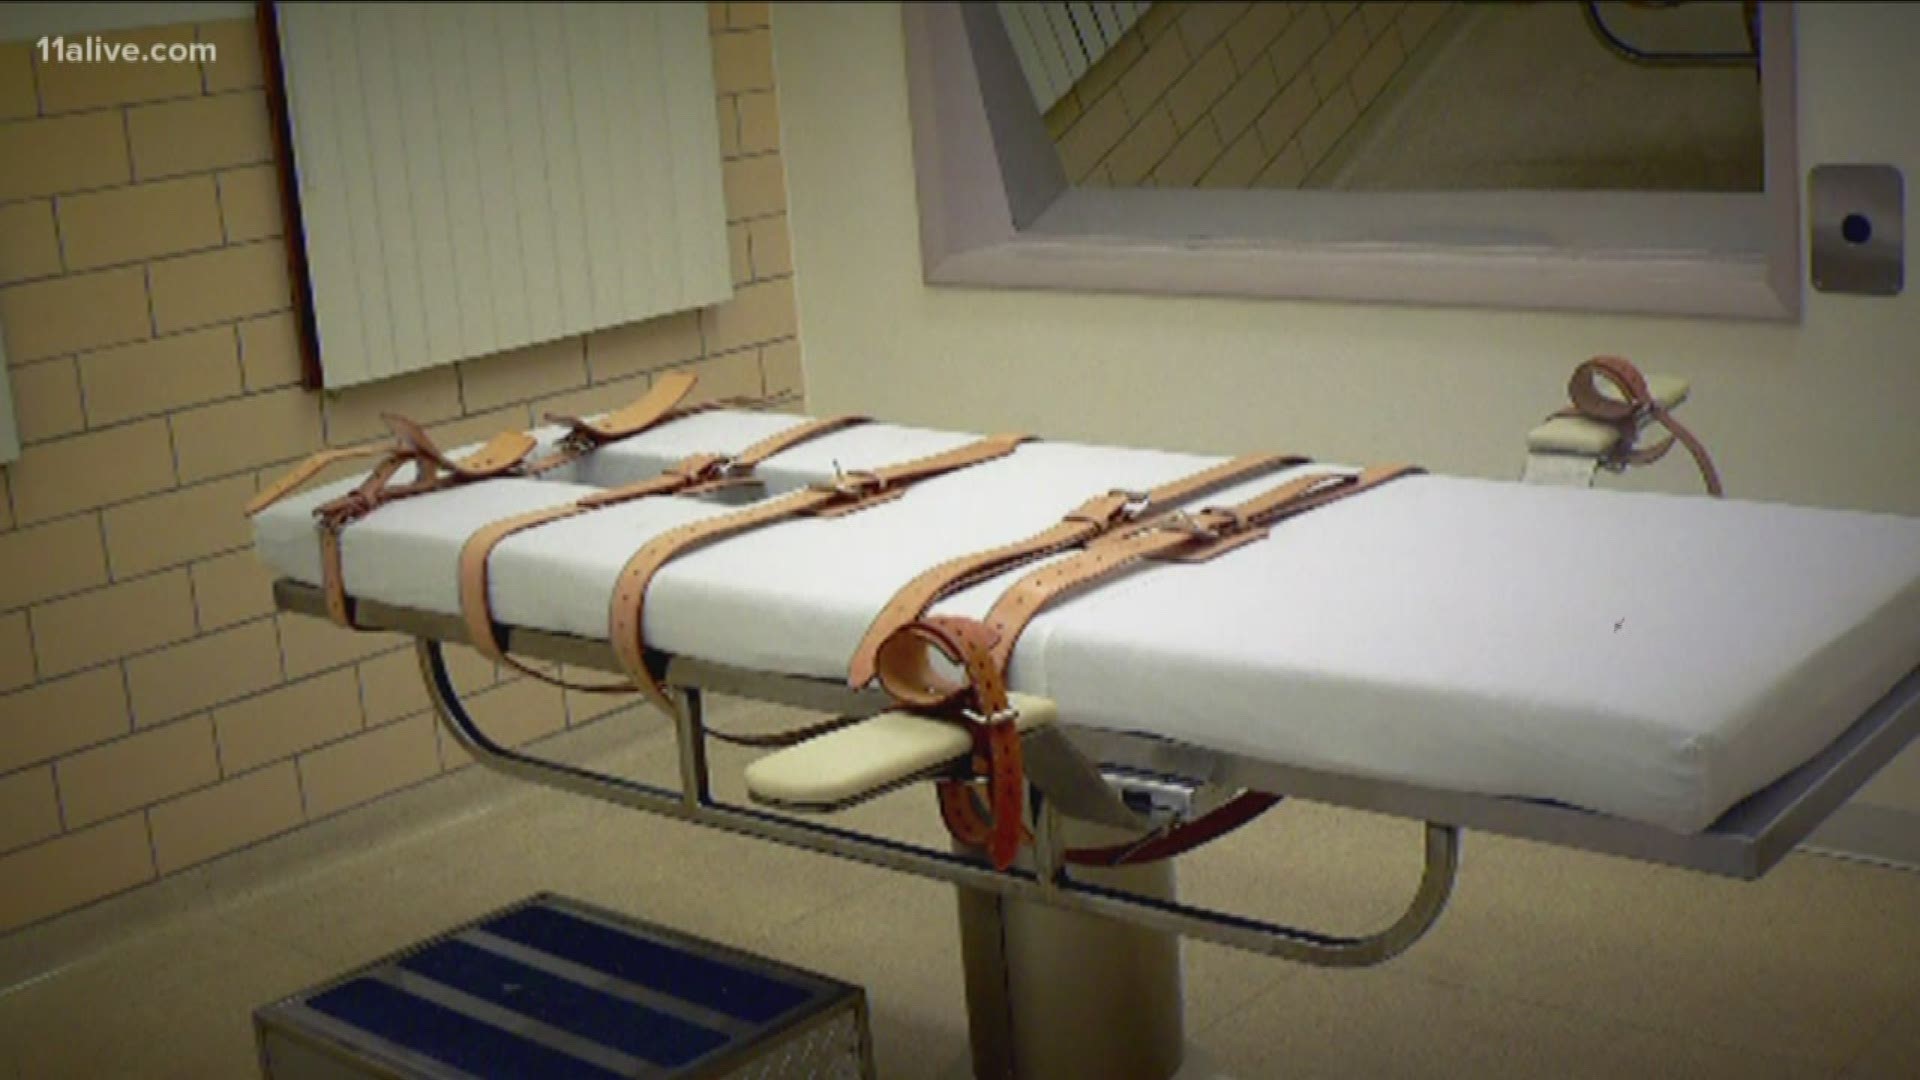 11Alive's Jeff Hullinger witnessed that execution first-hand gives perspective on Death Row executions.